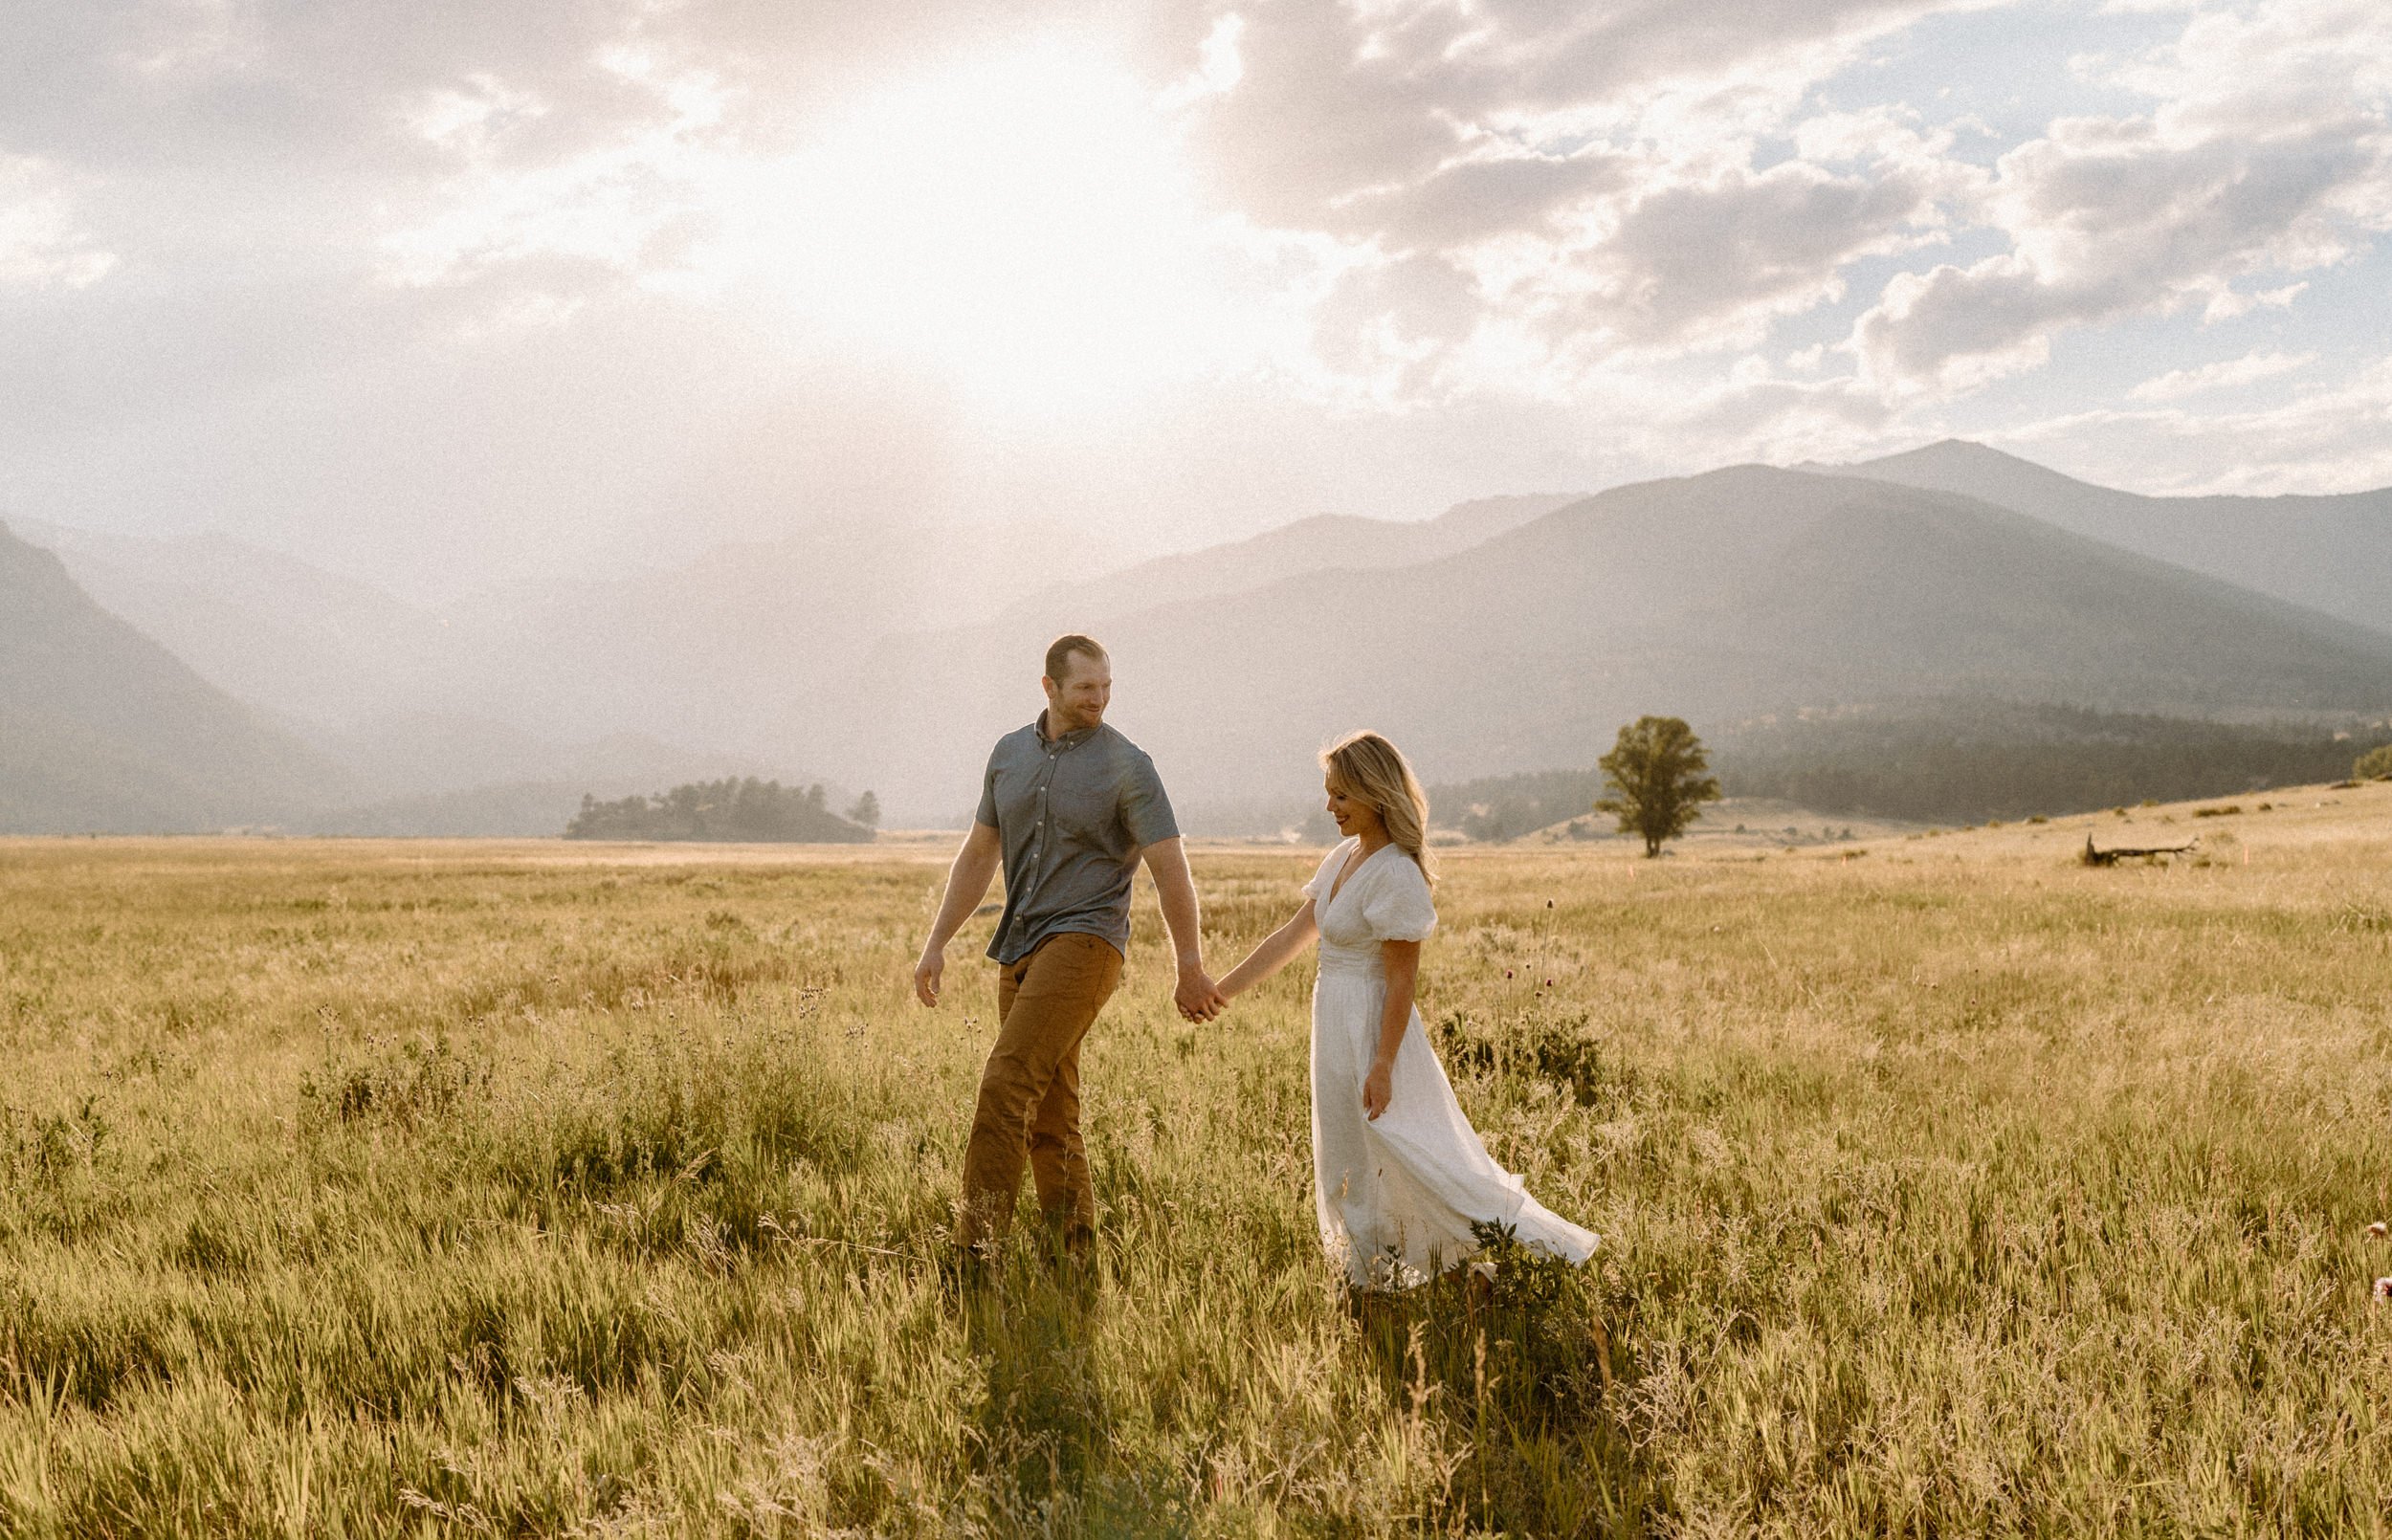 Man and woman hold hands while walking through a meadow in Rocky Mountain National Park